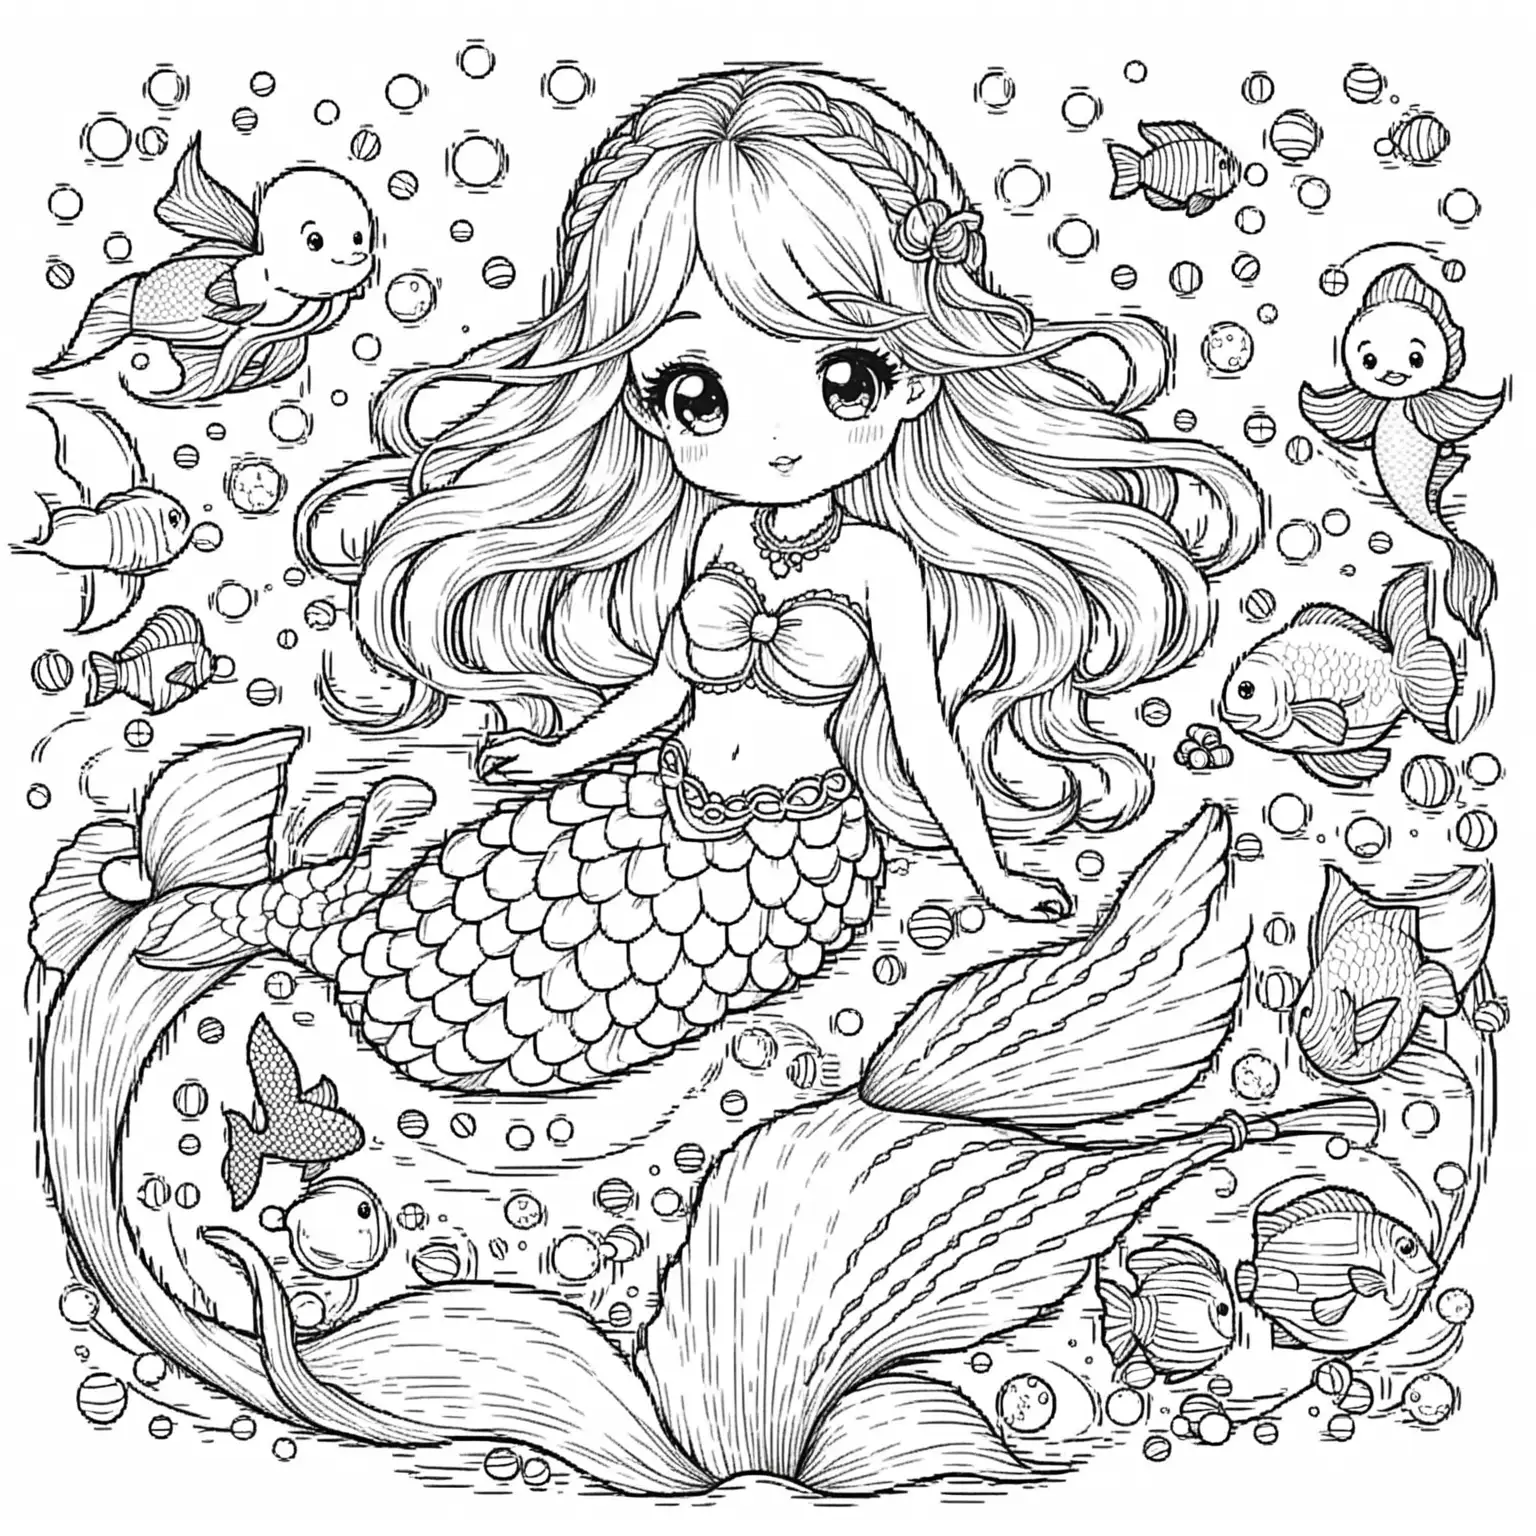 Coloring book style, a cute mermaid on a ver surrounded with toys